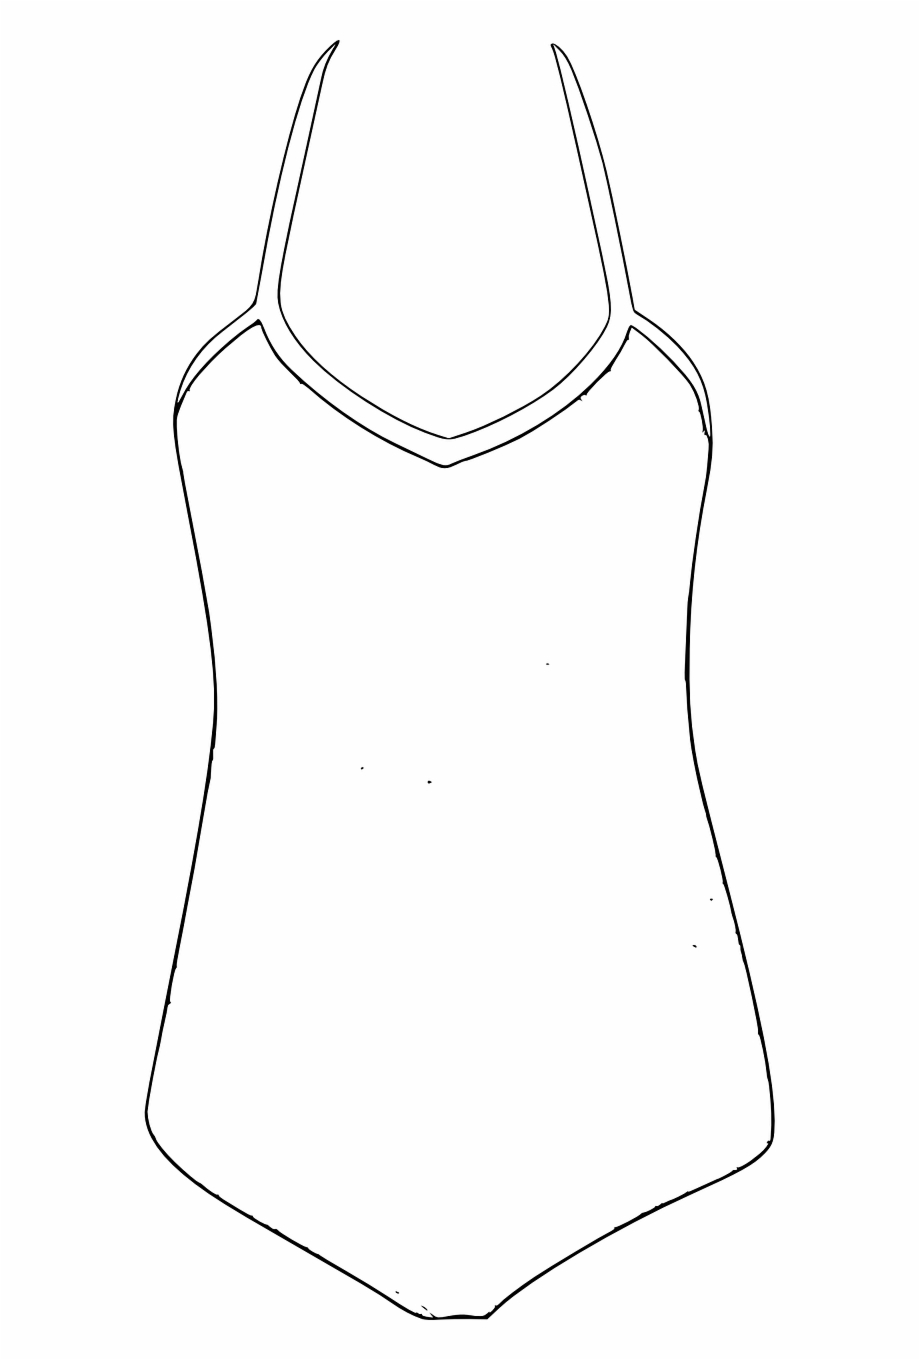 bathing suit clipart black and white
